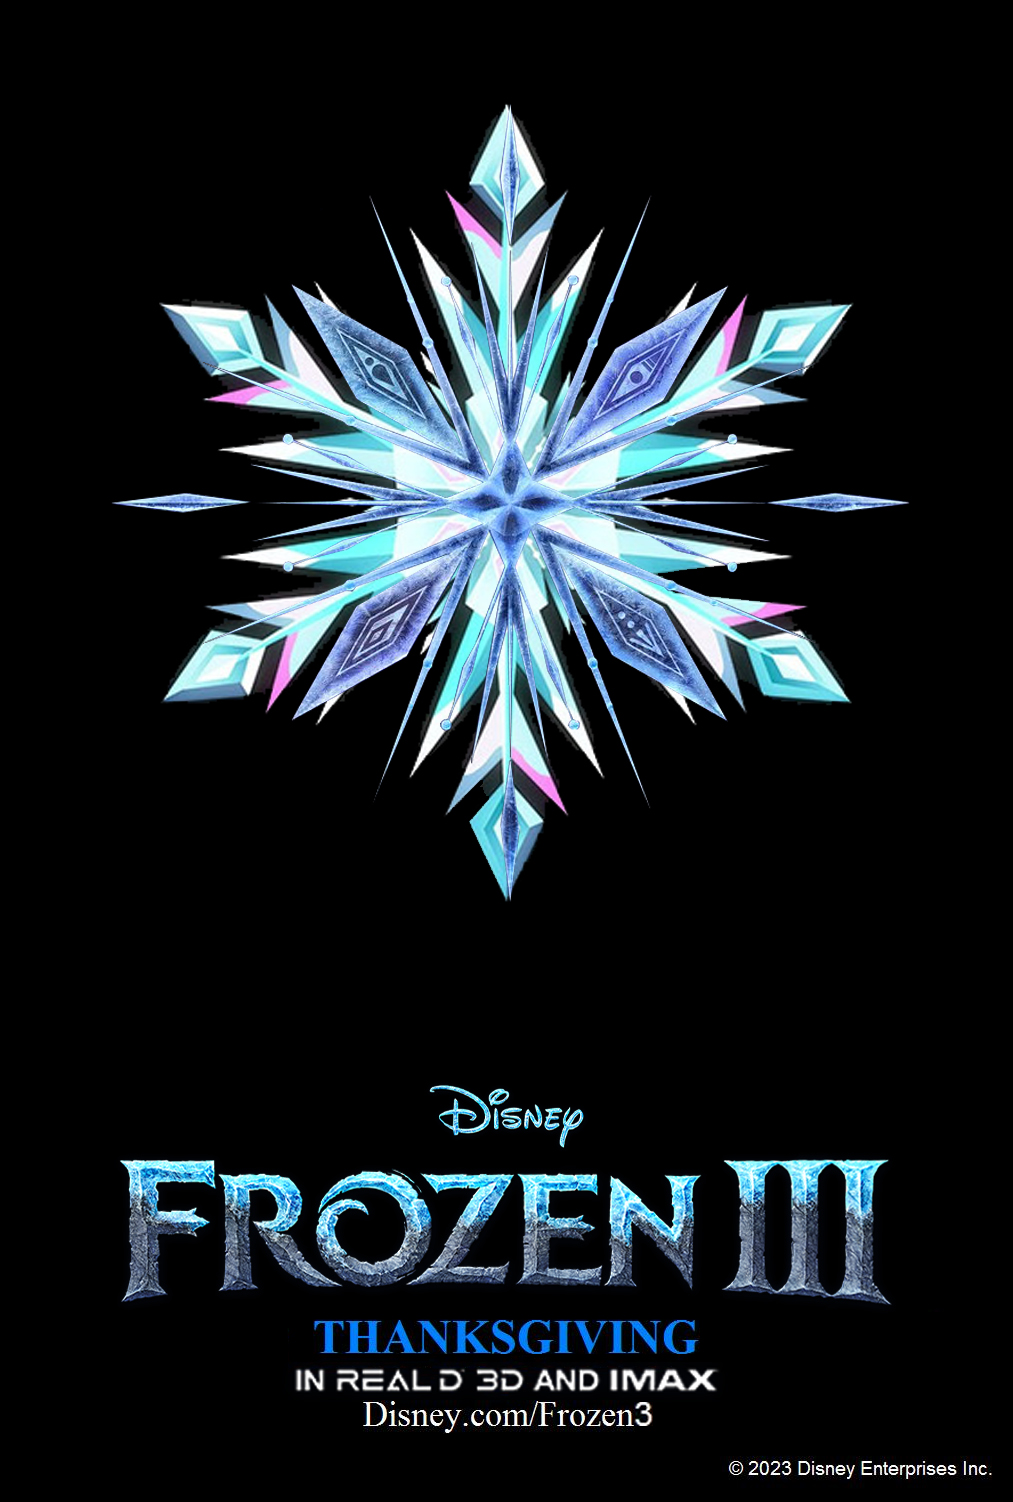 Frozen 3' Story Stems From an 'Incredible Idea,' Says Franchise